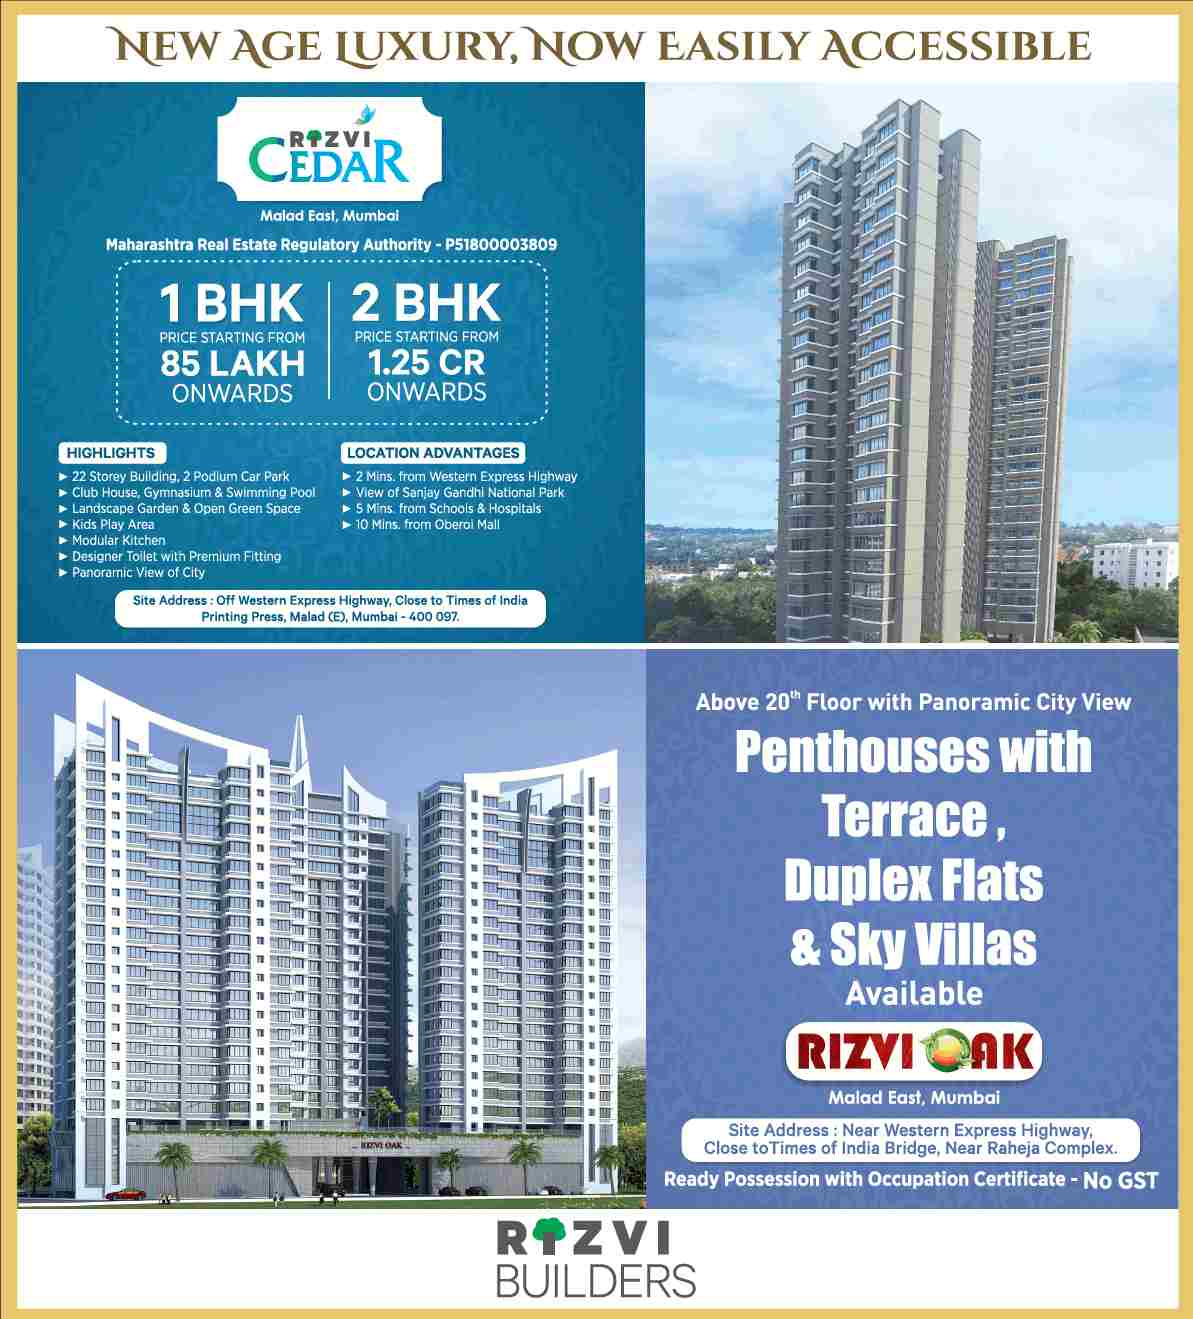 Get easy access to new age luxury by investing at Rizvi properties in Mumbai